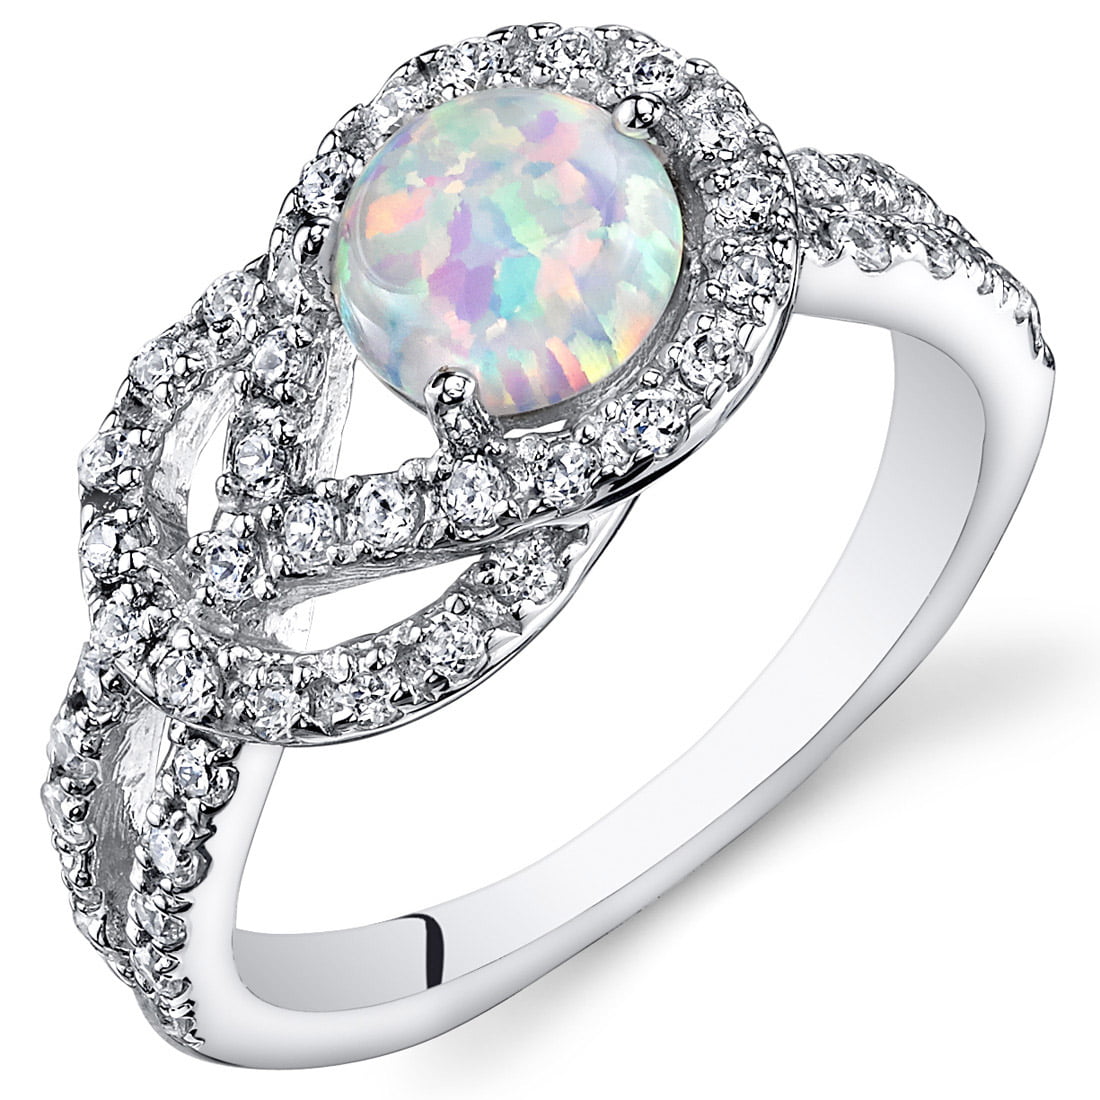 0.75 Created Opal Engagement Ring in Rhodium-Plated Sterling Silver ...